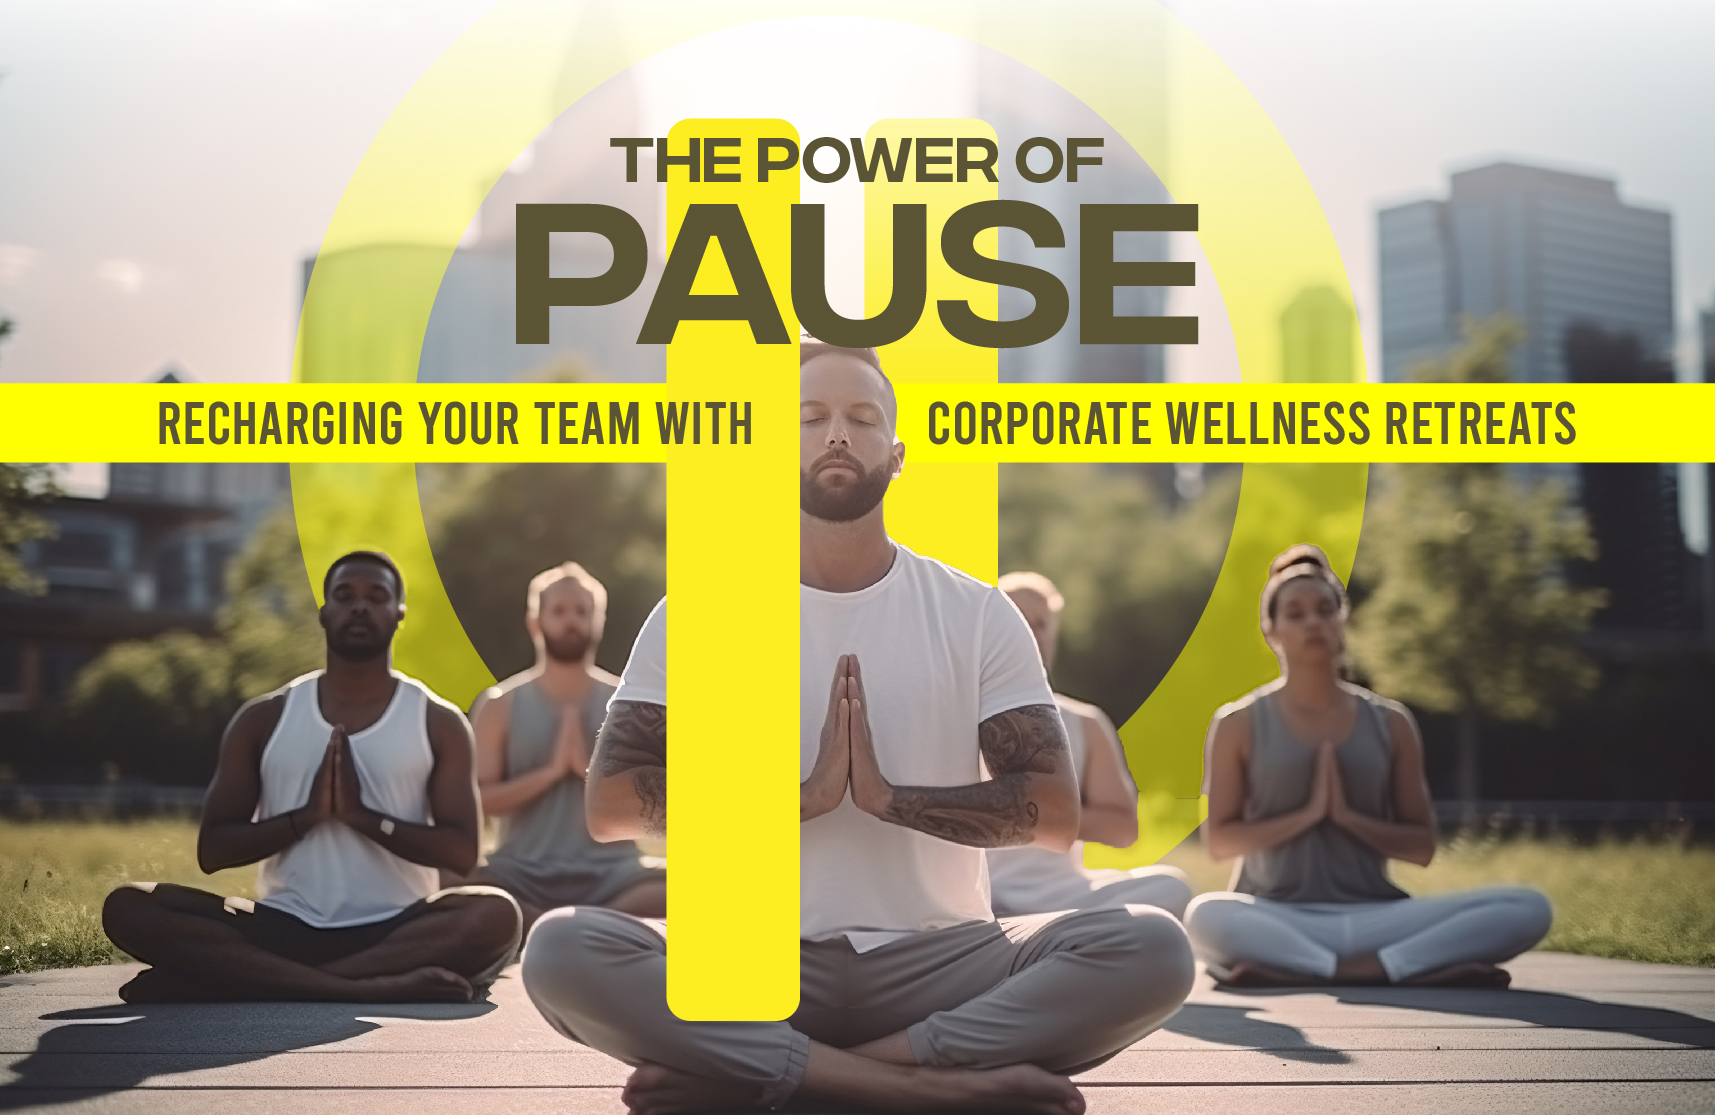 The Power of Pause: Recharging Your Team with Corporate Wellness Retreats